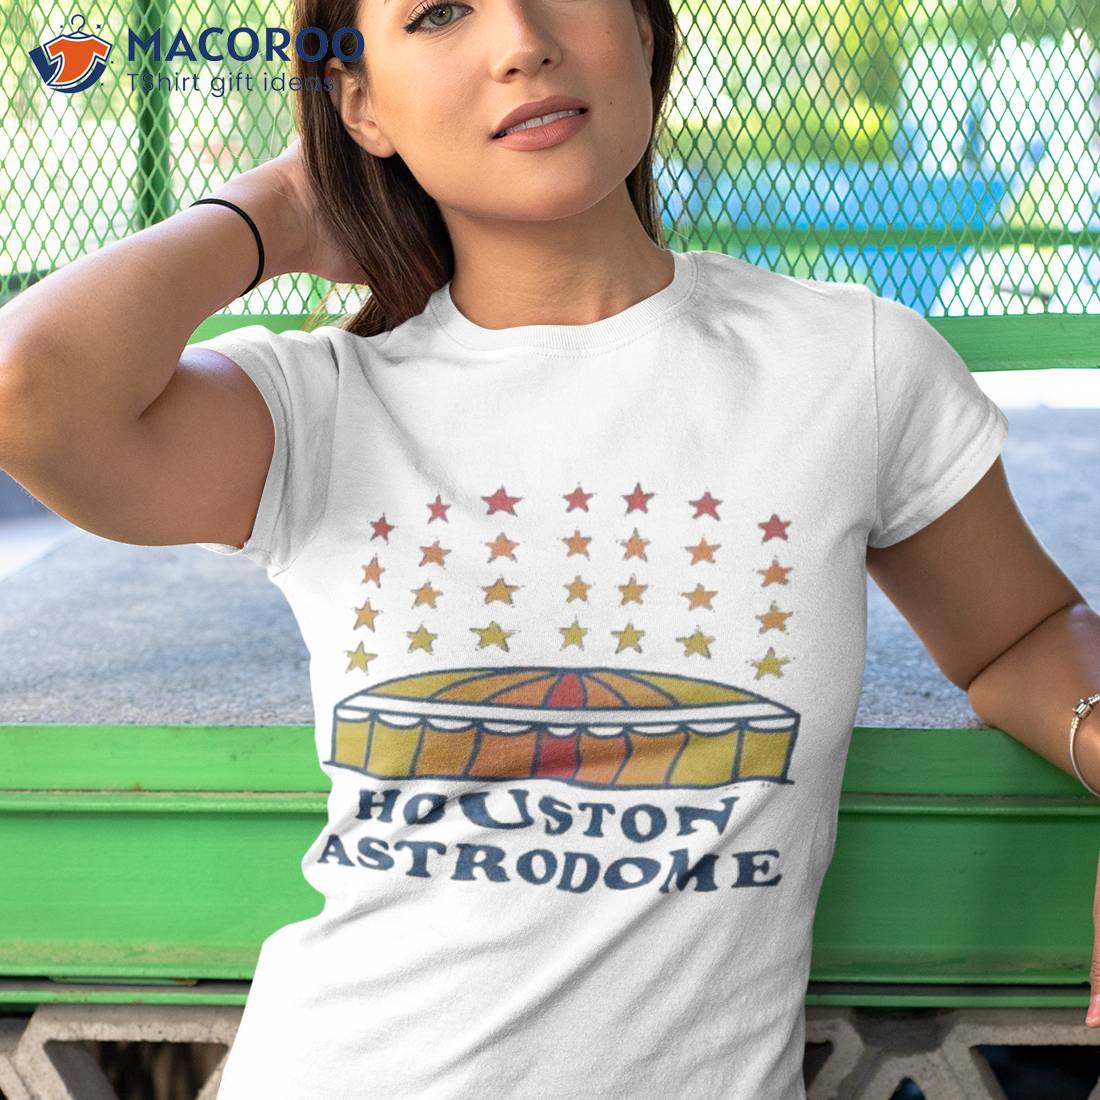 Astrodome T-Shirts for Sale